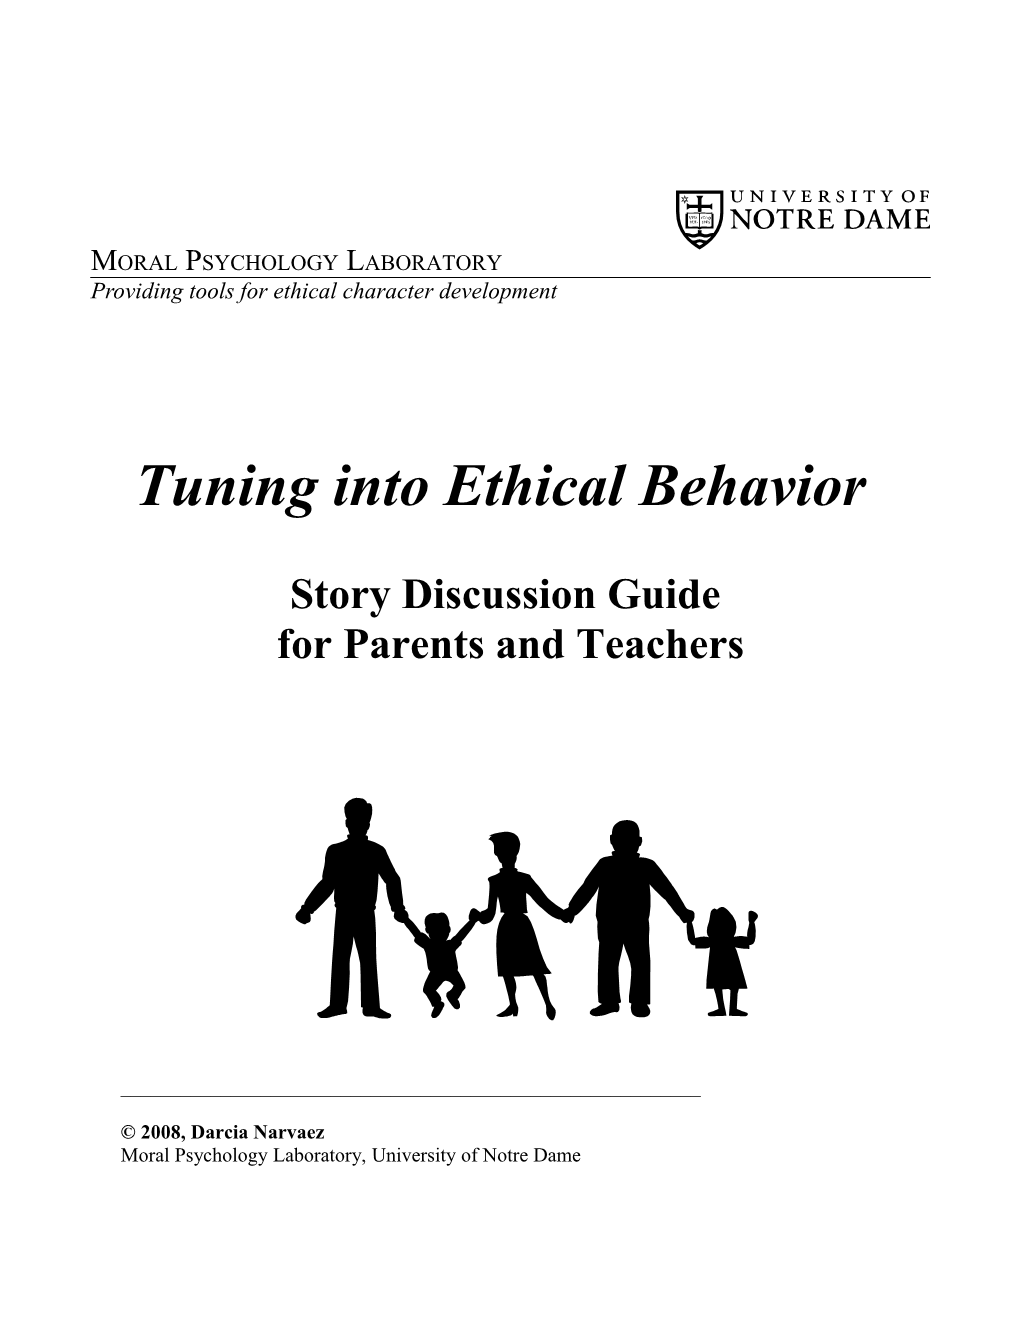 Tuning Into Ethical Behavior